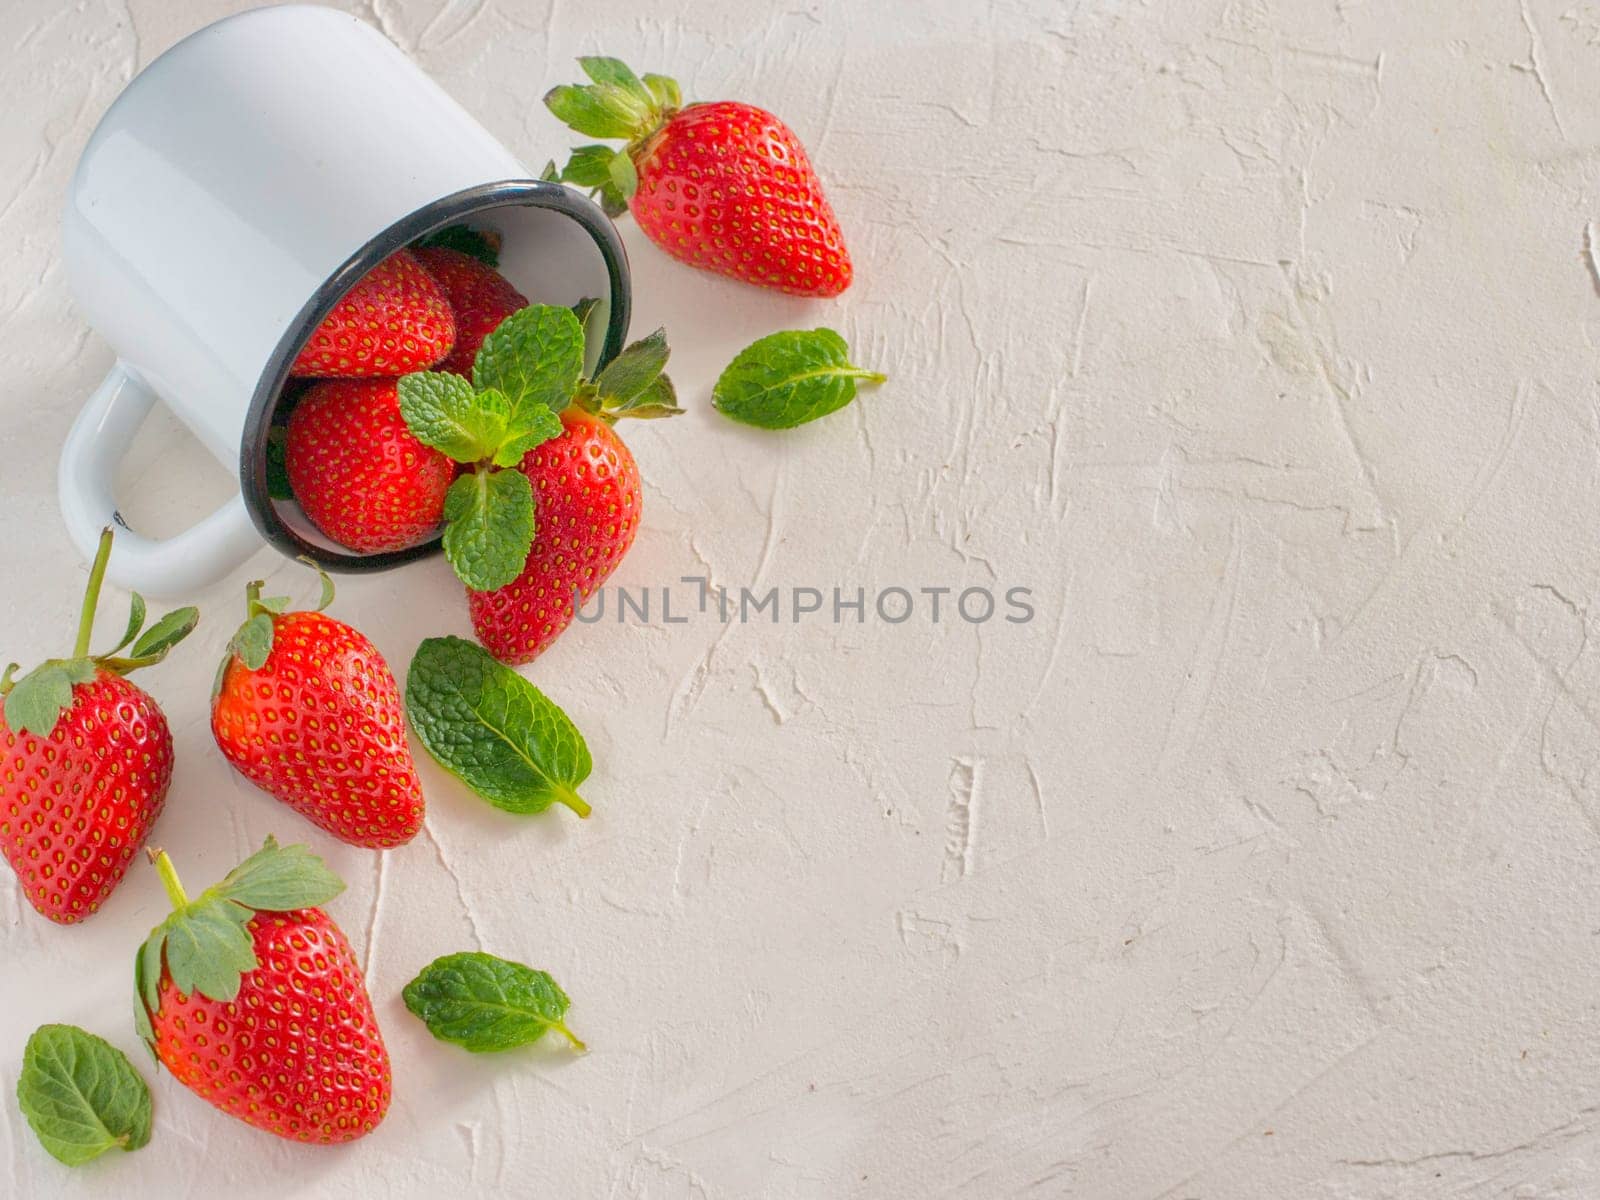 strawberries in wooden bowl by fascinadora